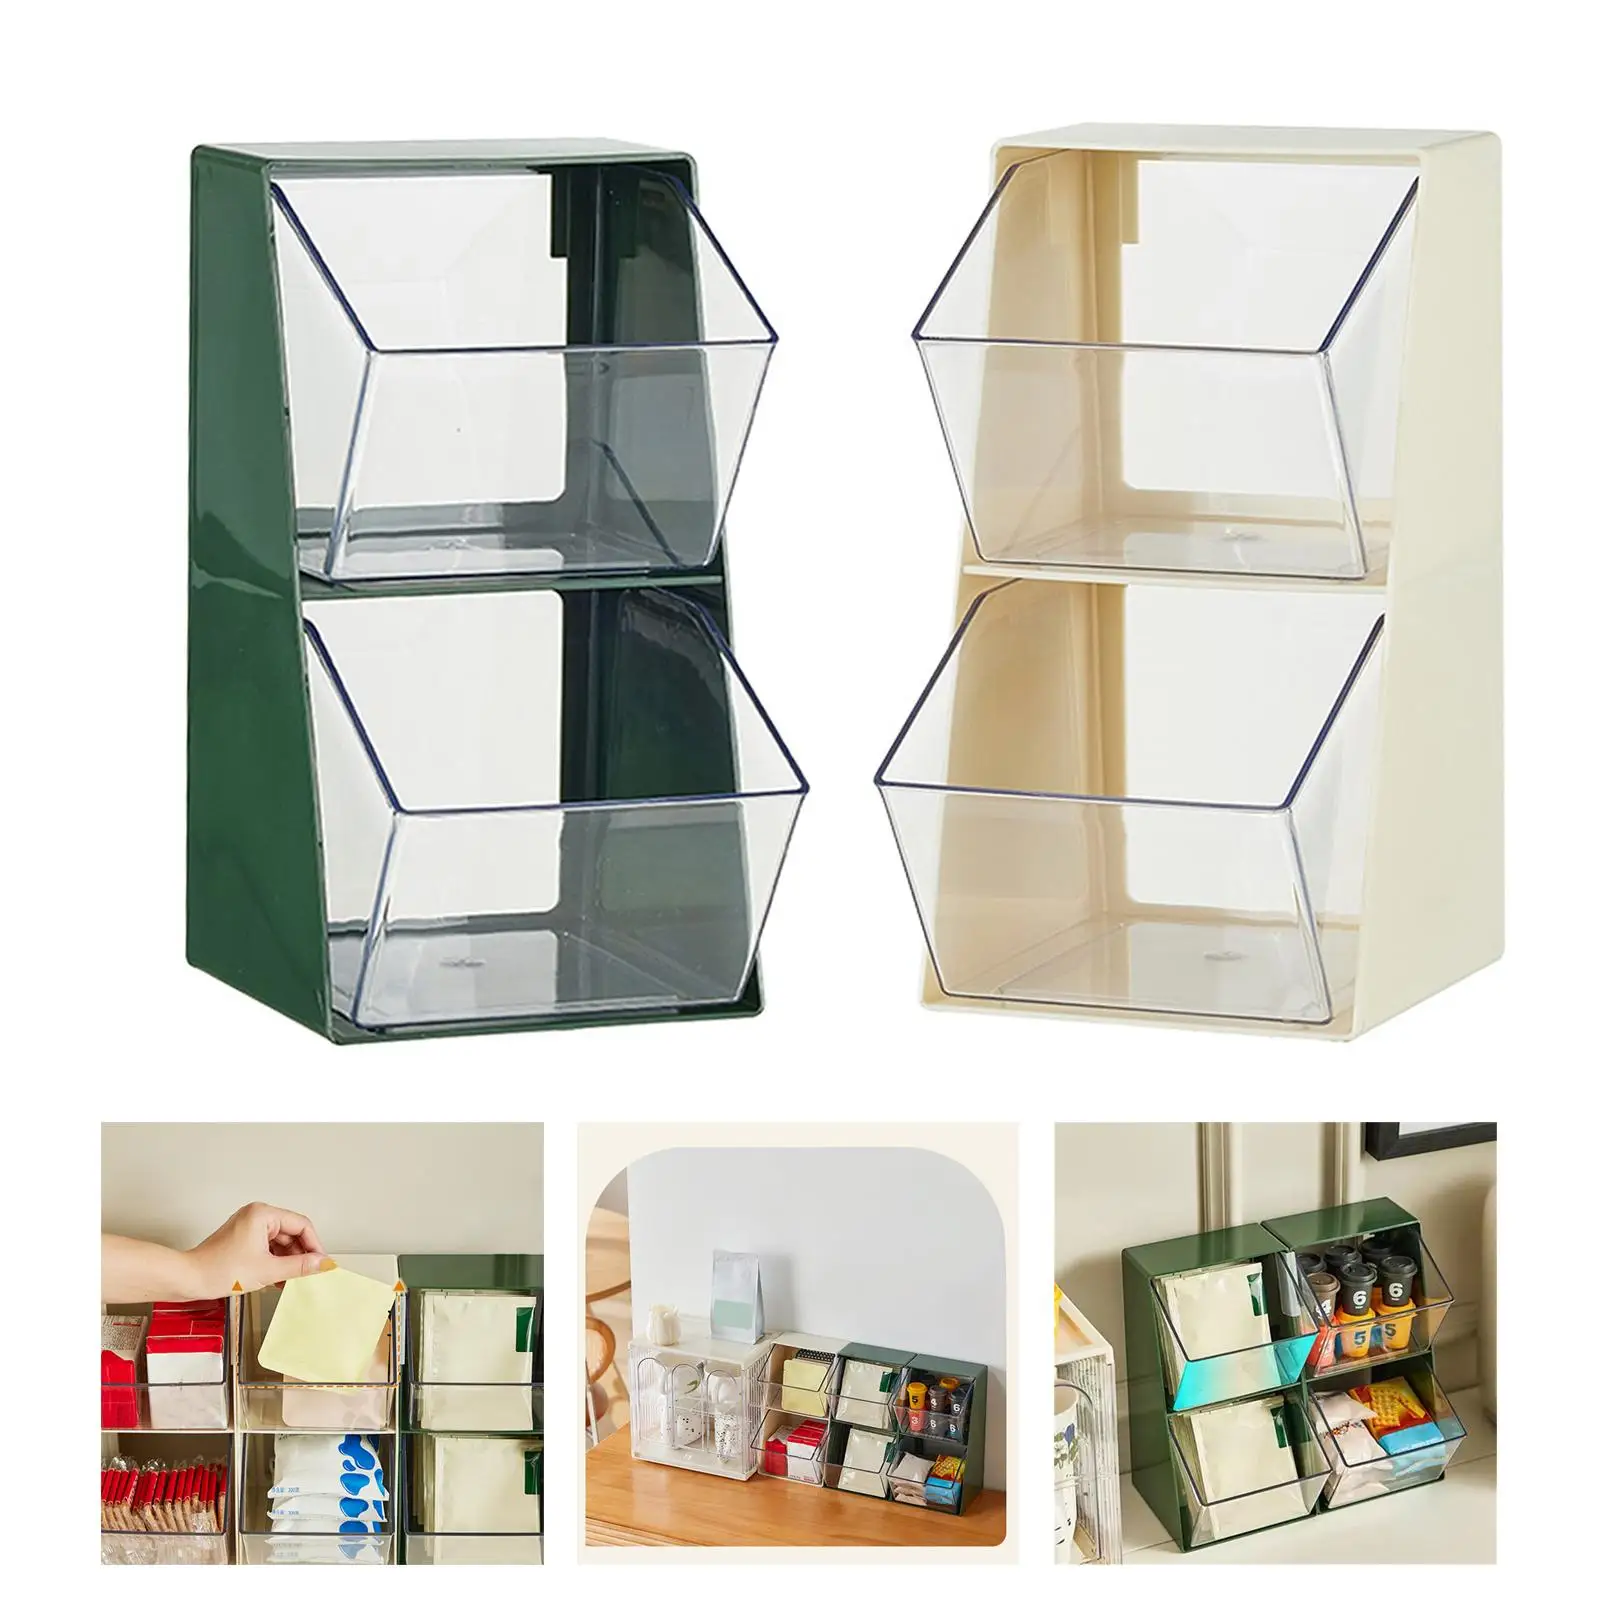 Tea Canister Containers,Handy Tea Box Organizer,Tea Storage for Pantry Cabinet